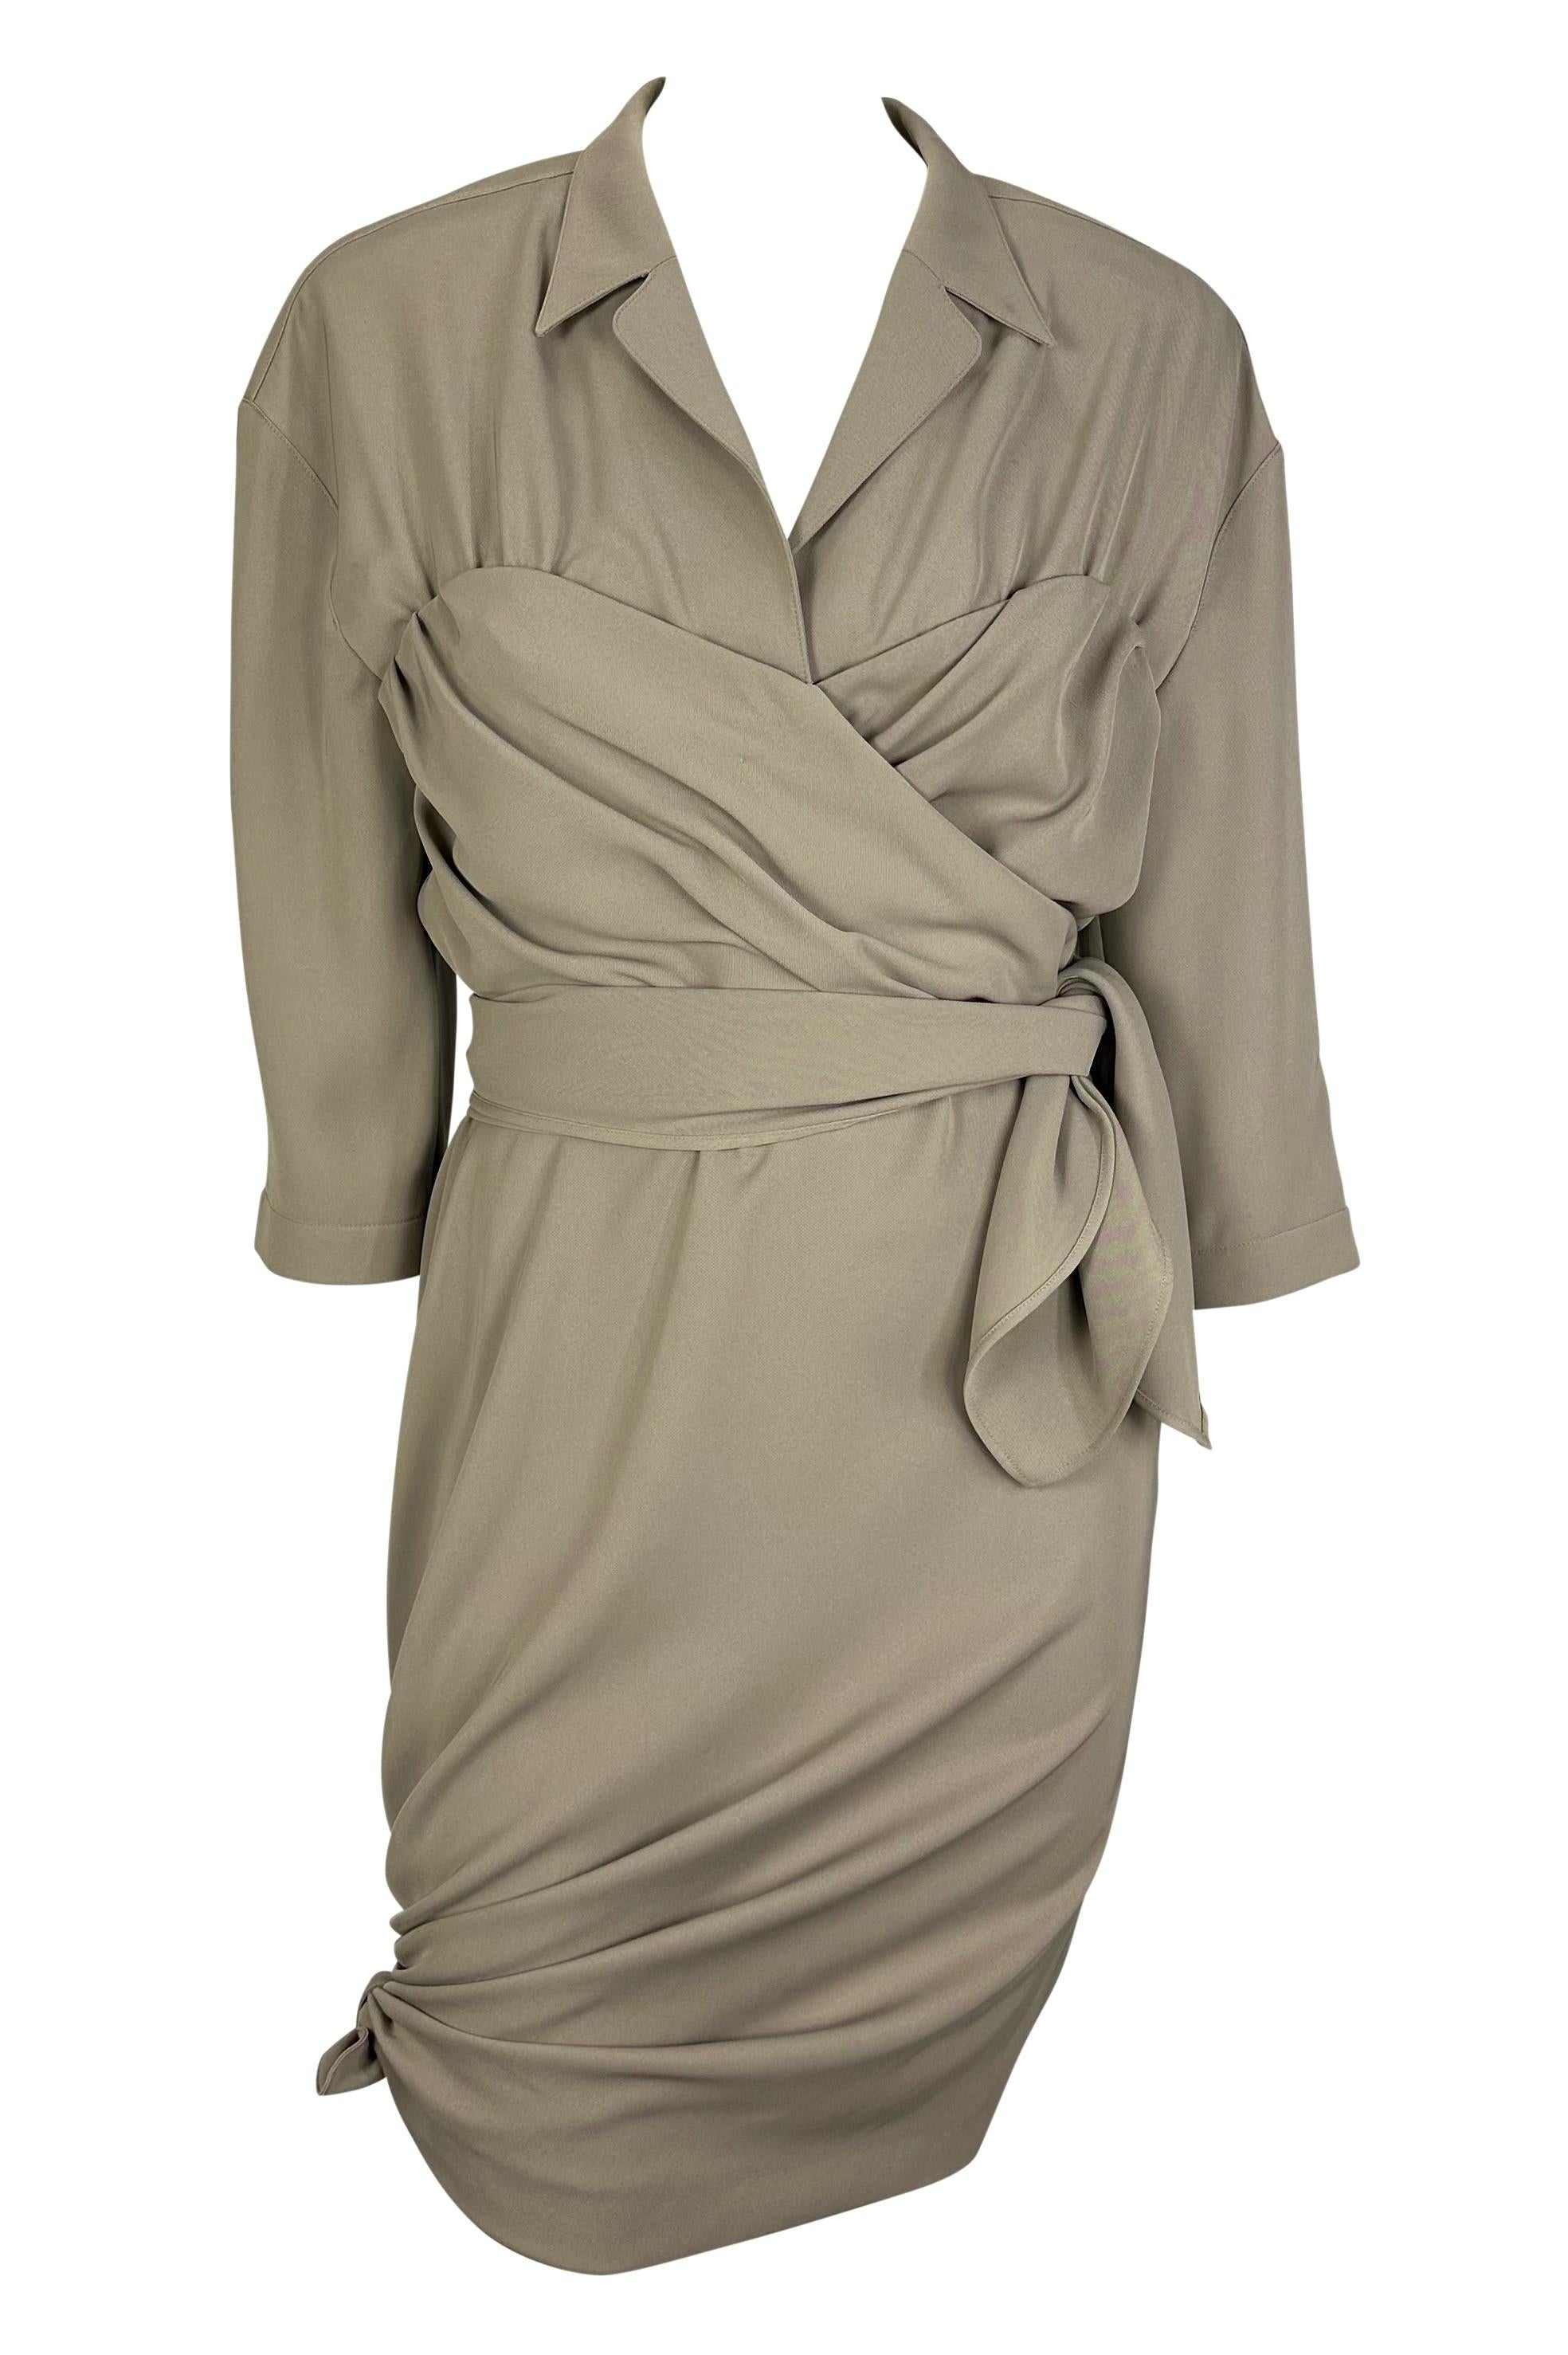 Presenting a beige Thierry Mugler collared tie dress, designed by Manfred Mugler. From the 1980s, this fabulous dress features three-quarter-length sleeves, a plunging neckline, and ties around the waist and at the hem. This dress effortlessly